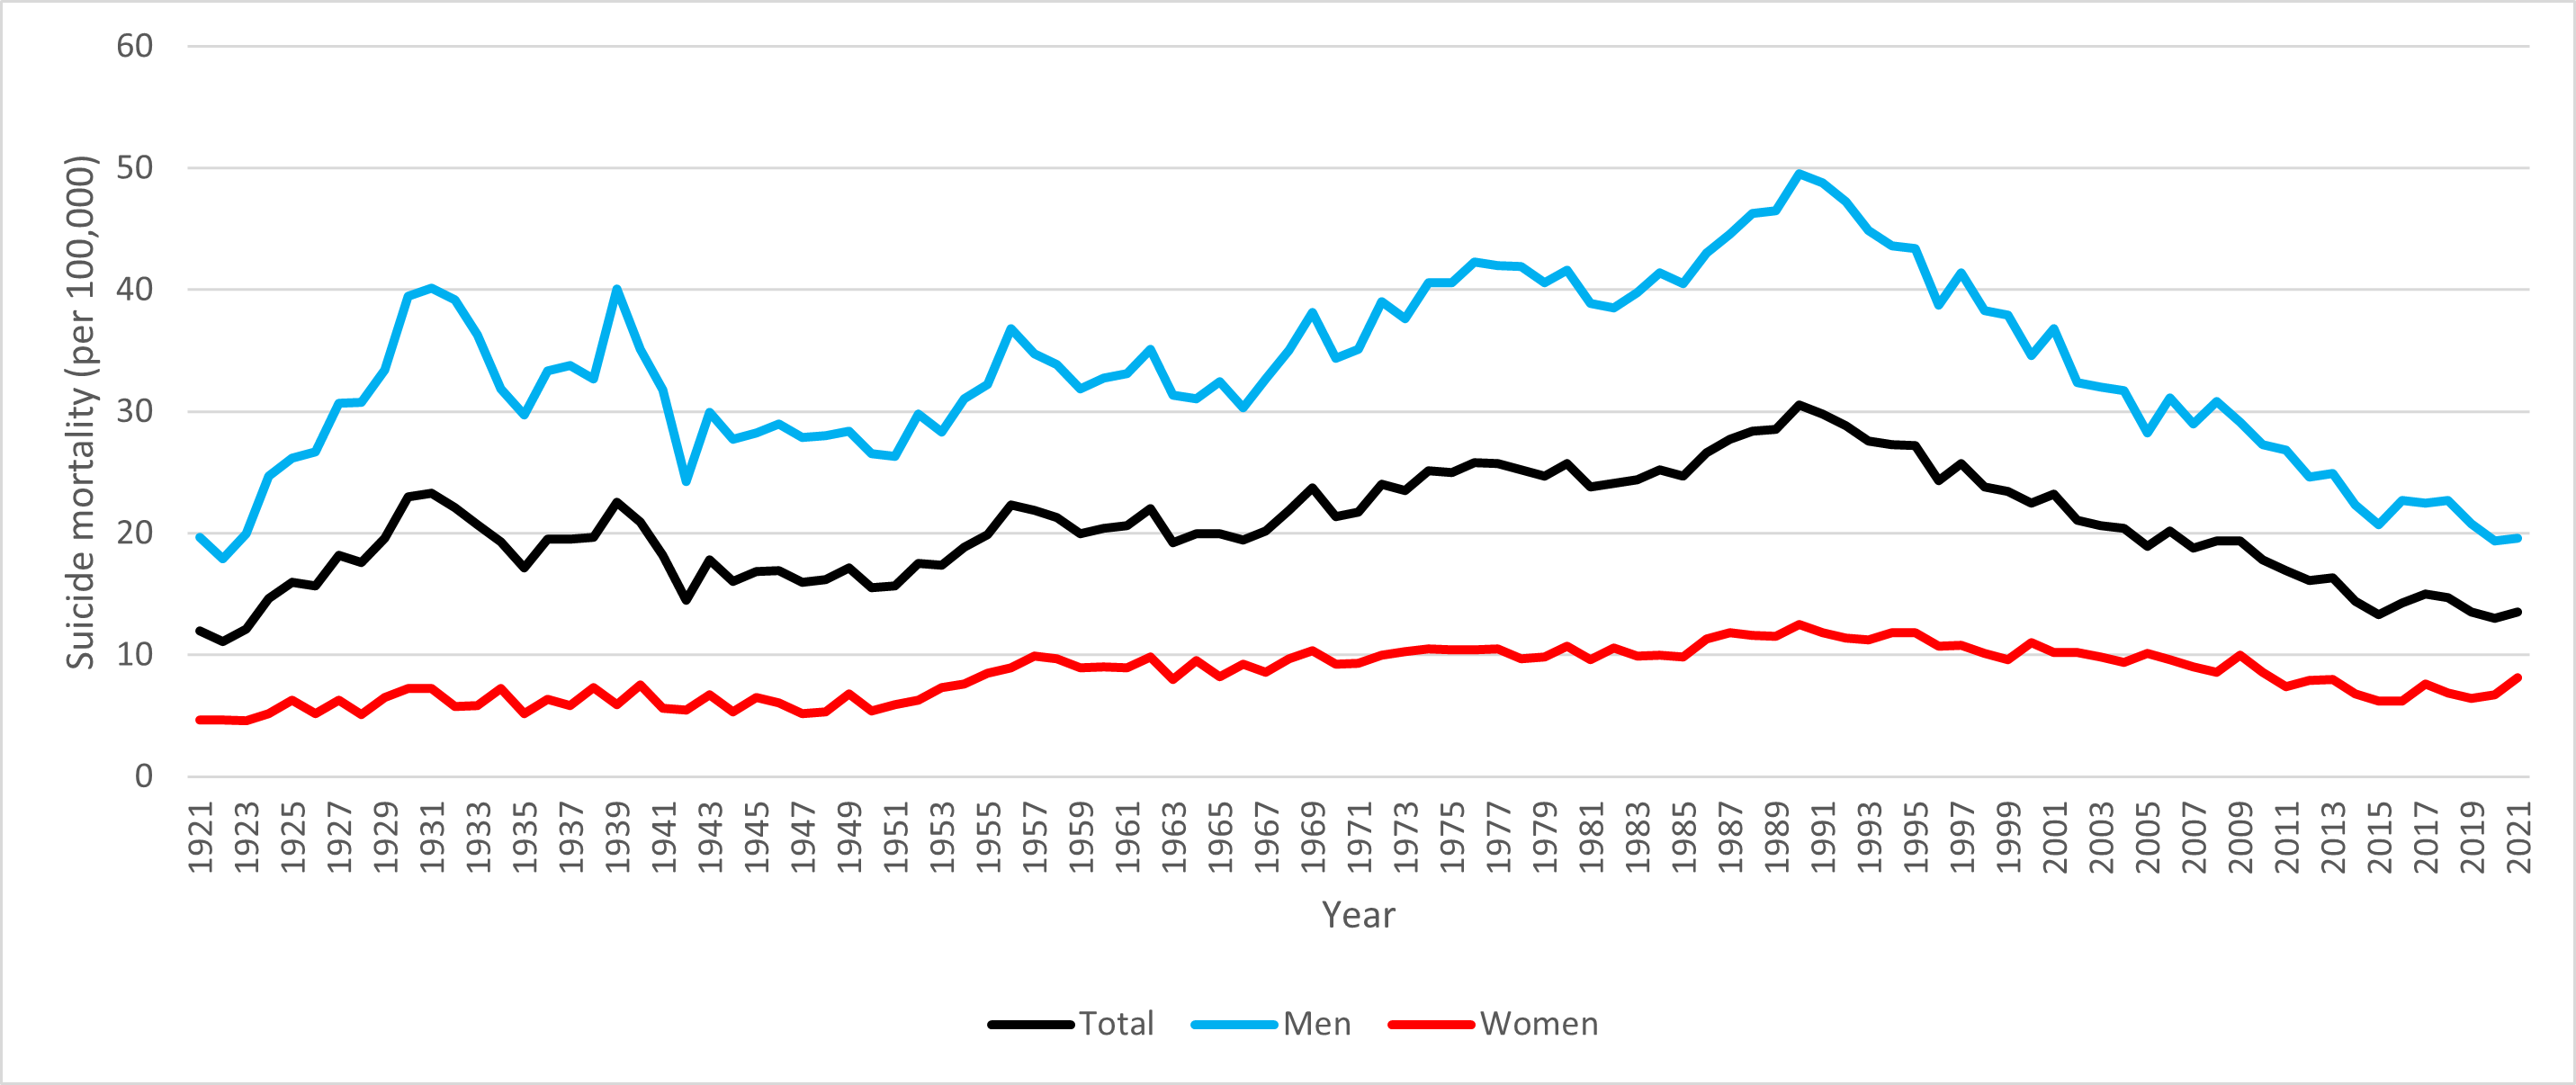 In Finland, the suicide rate peaked in 1990, and since then has steadily declined.